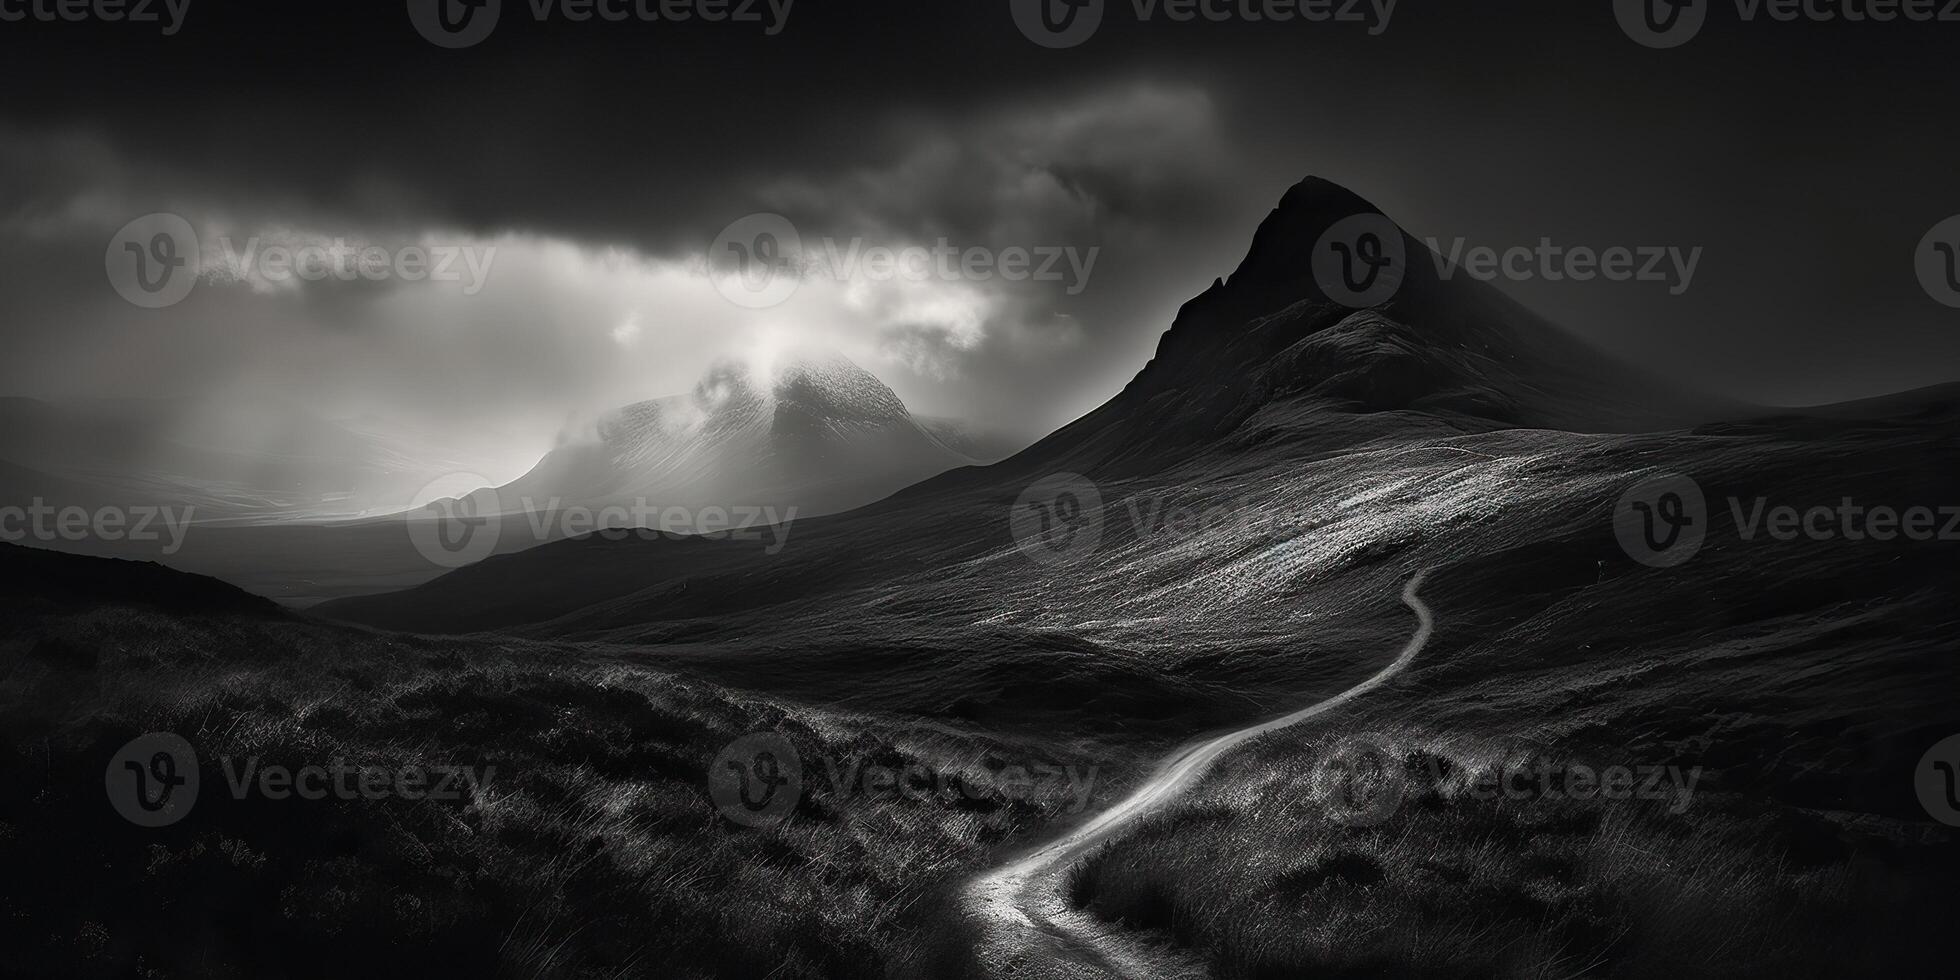 Amazing black and white photography of beautiful mountains and hills with dark skies landscape background view scene photo